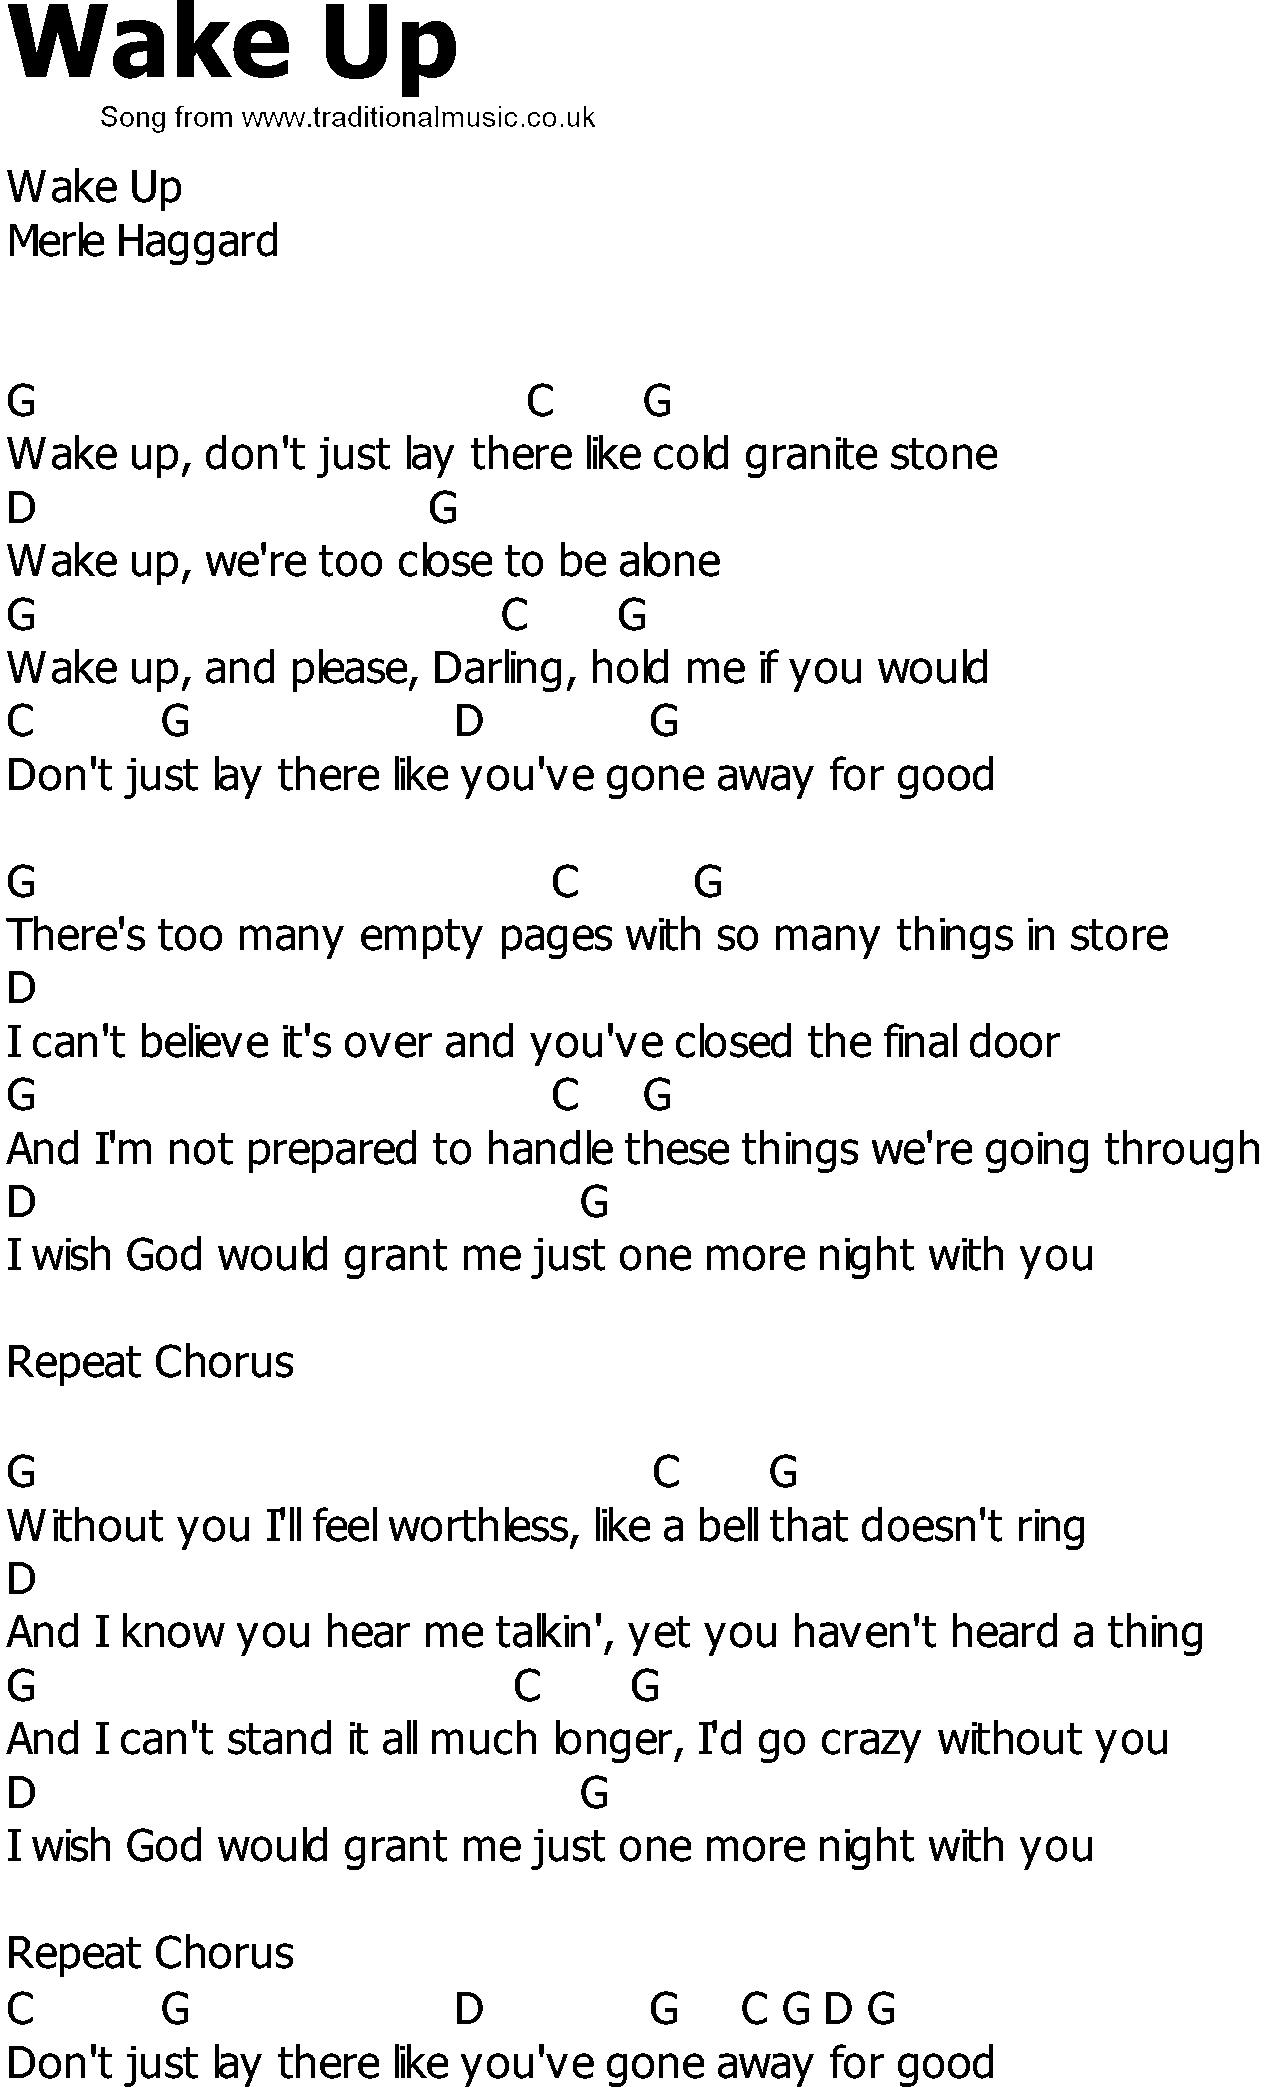 Old Country song lyrics with chords - Wake Up